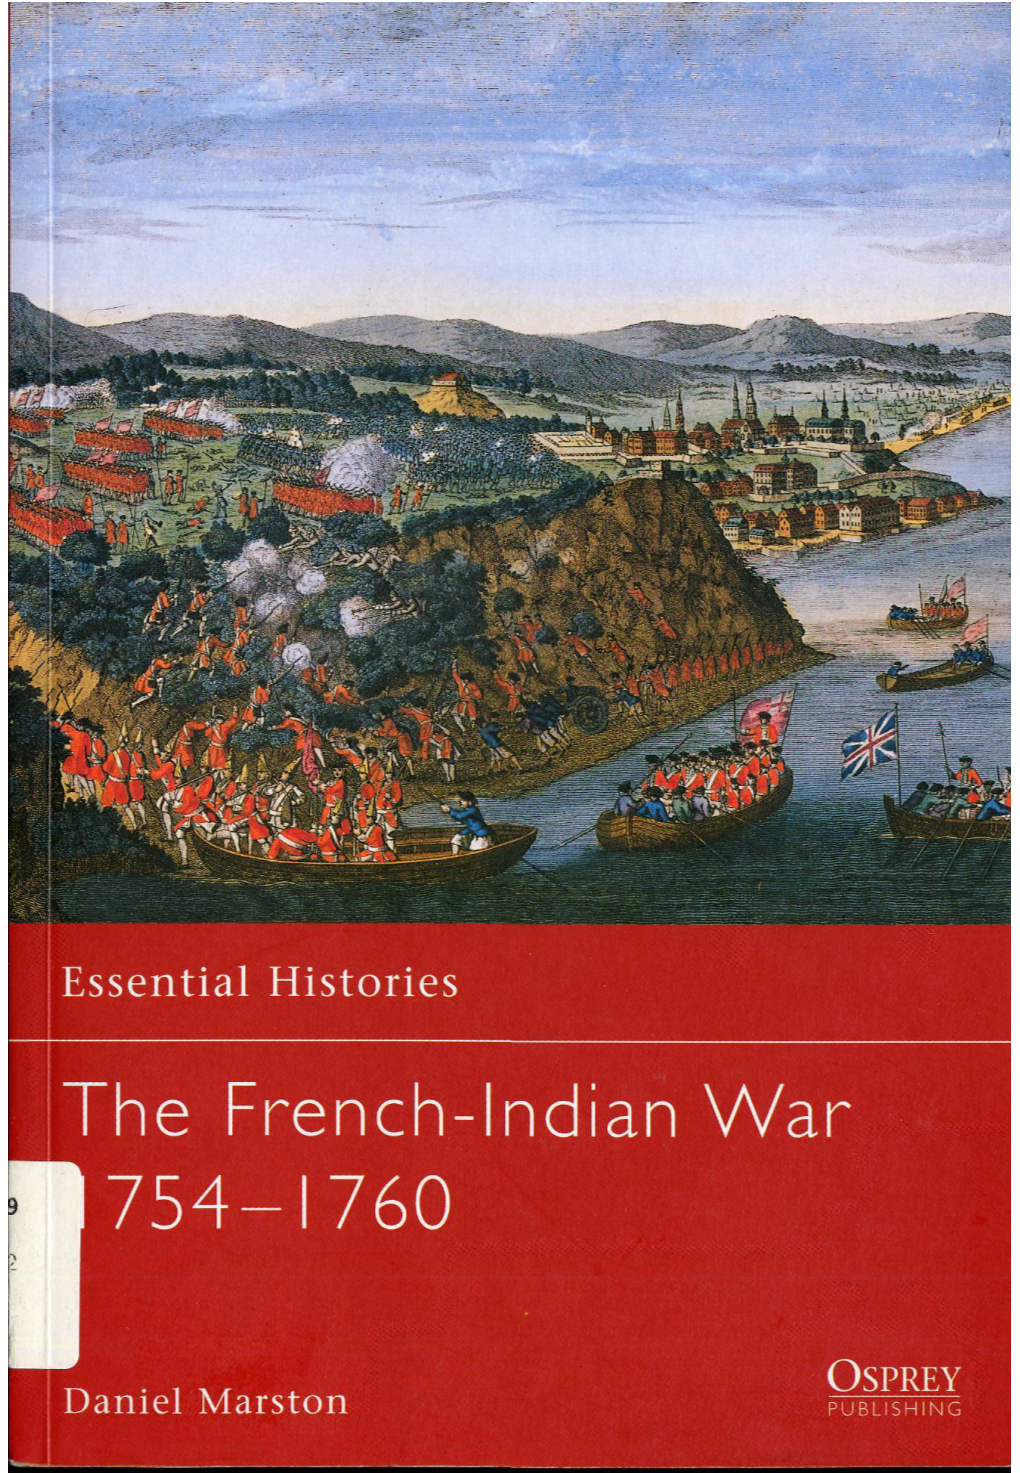 Essential Histories the French-Indian War 1754-1760